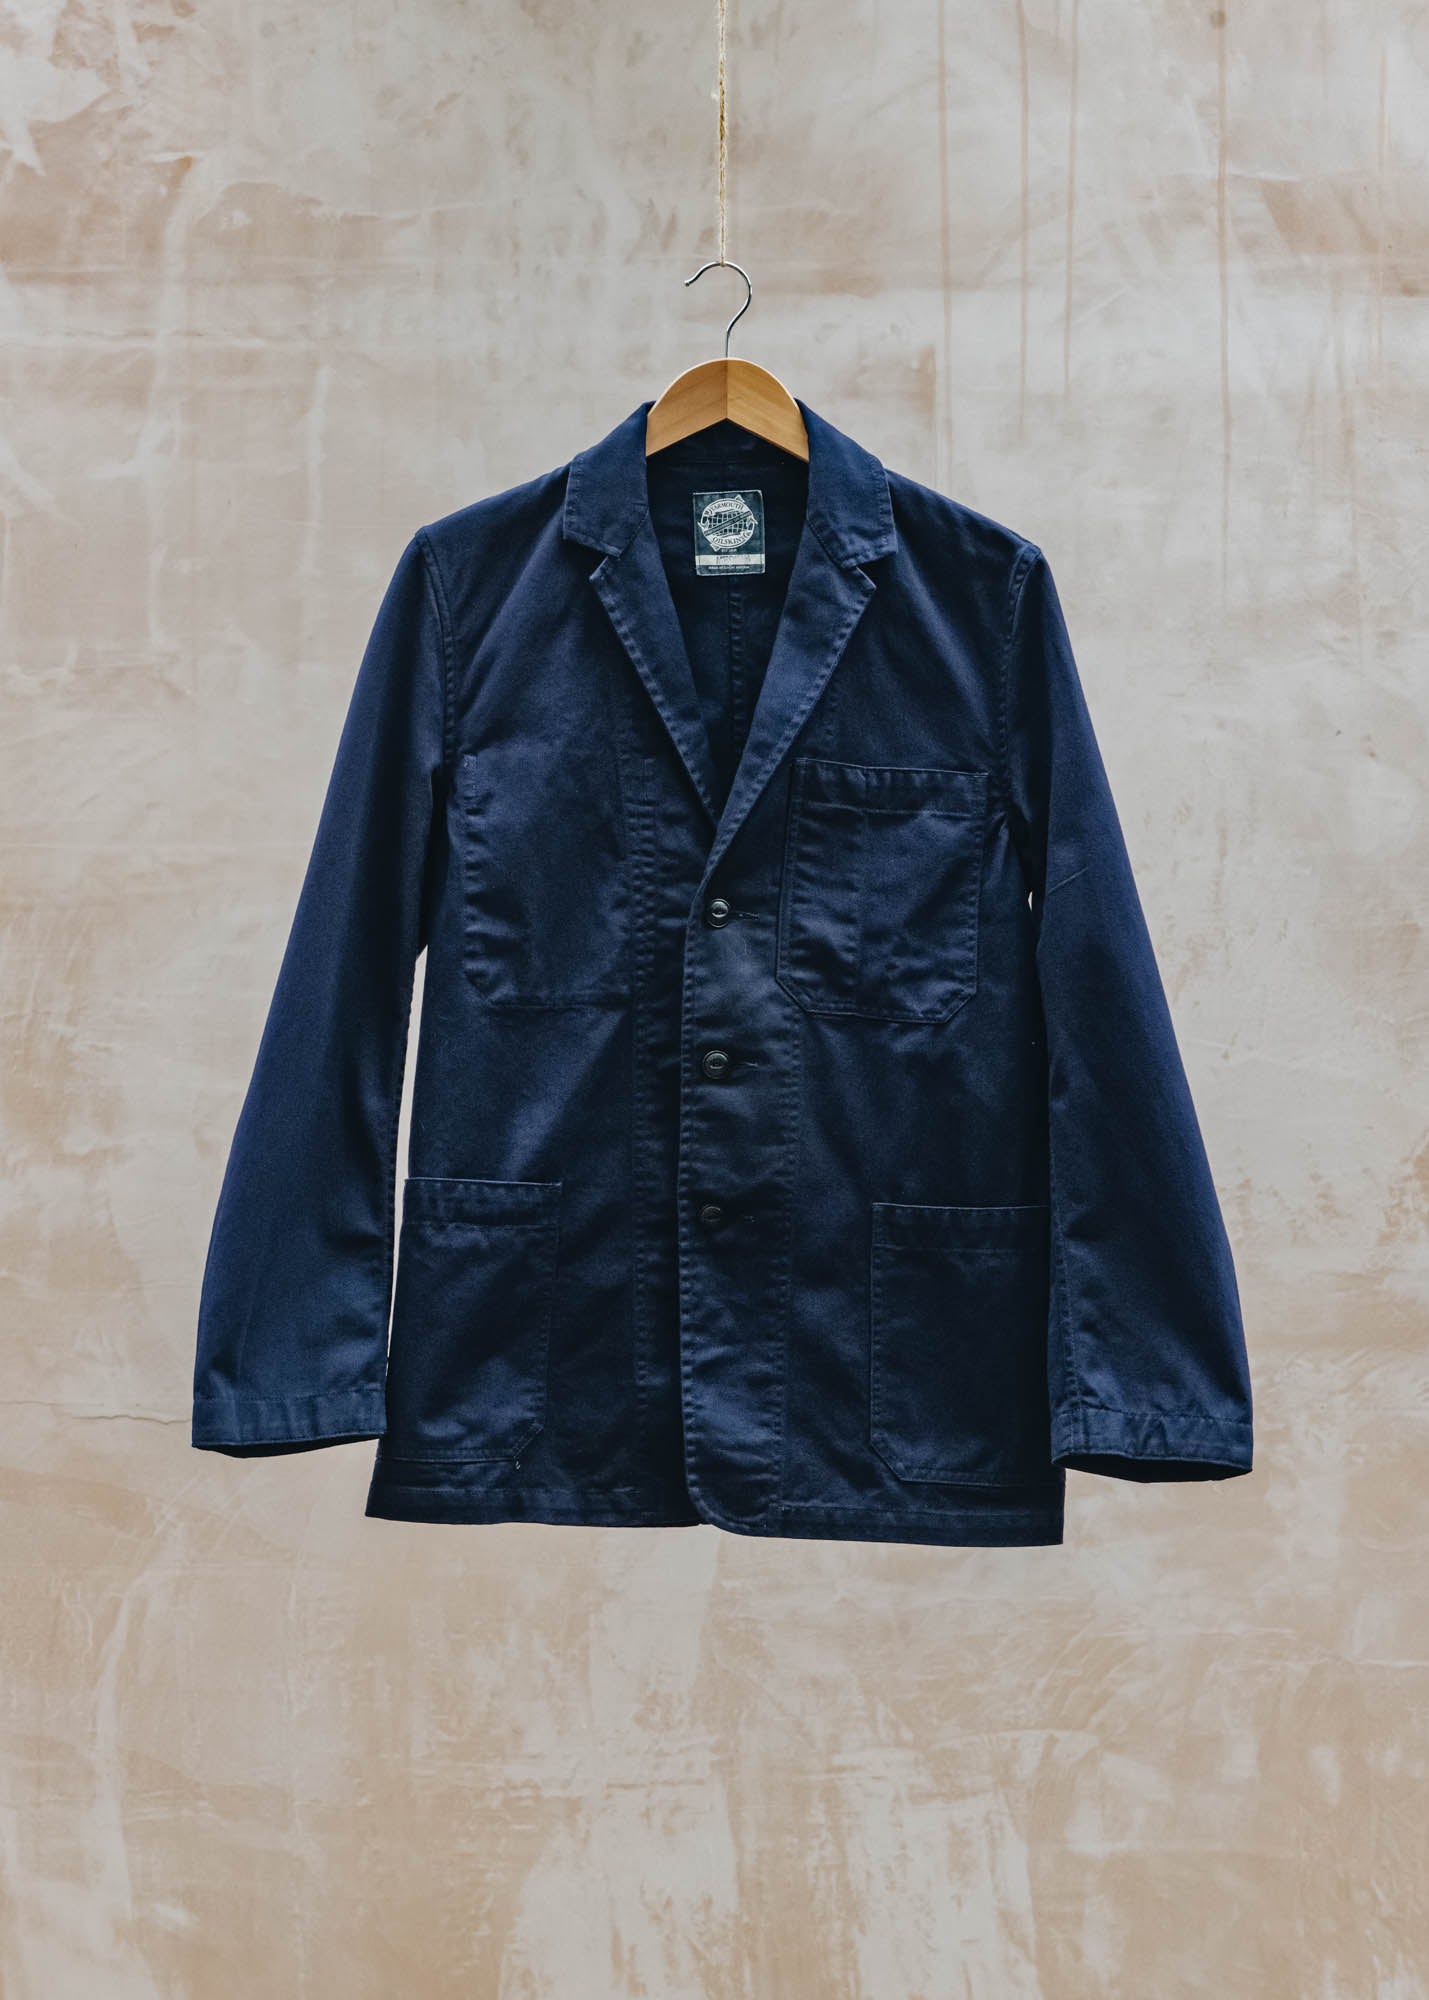 Yarmouth Oilskins Engineers Jacket in Navy